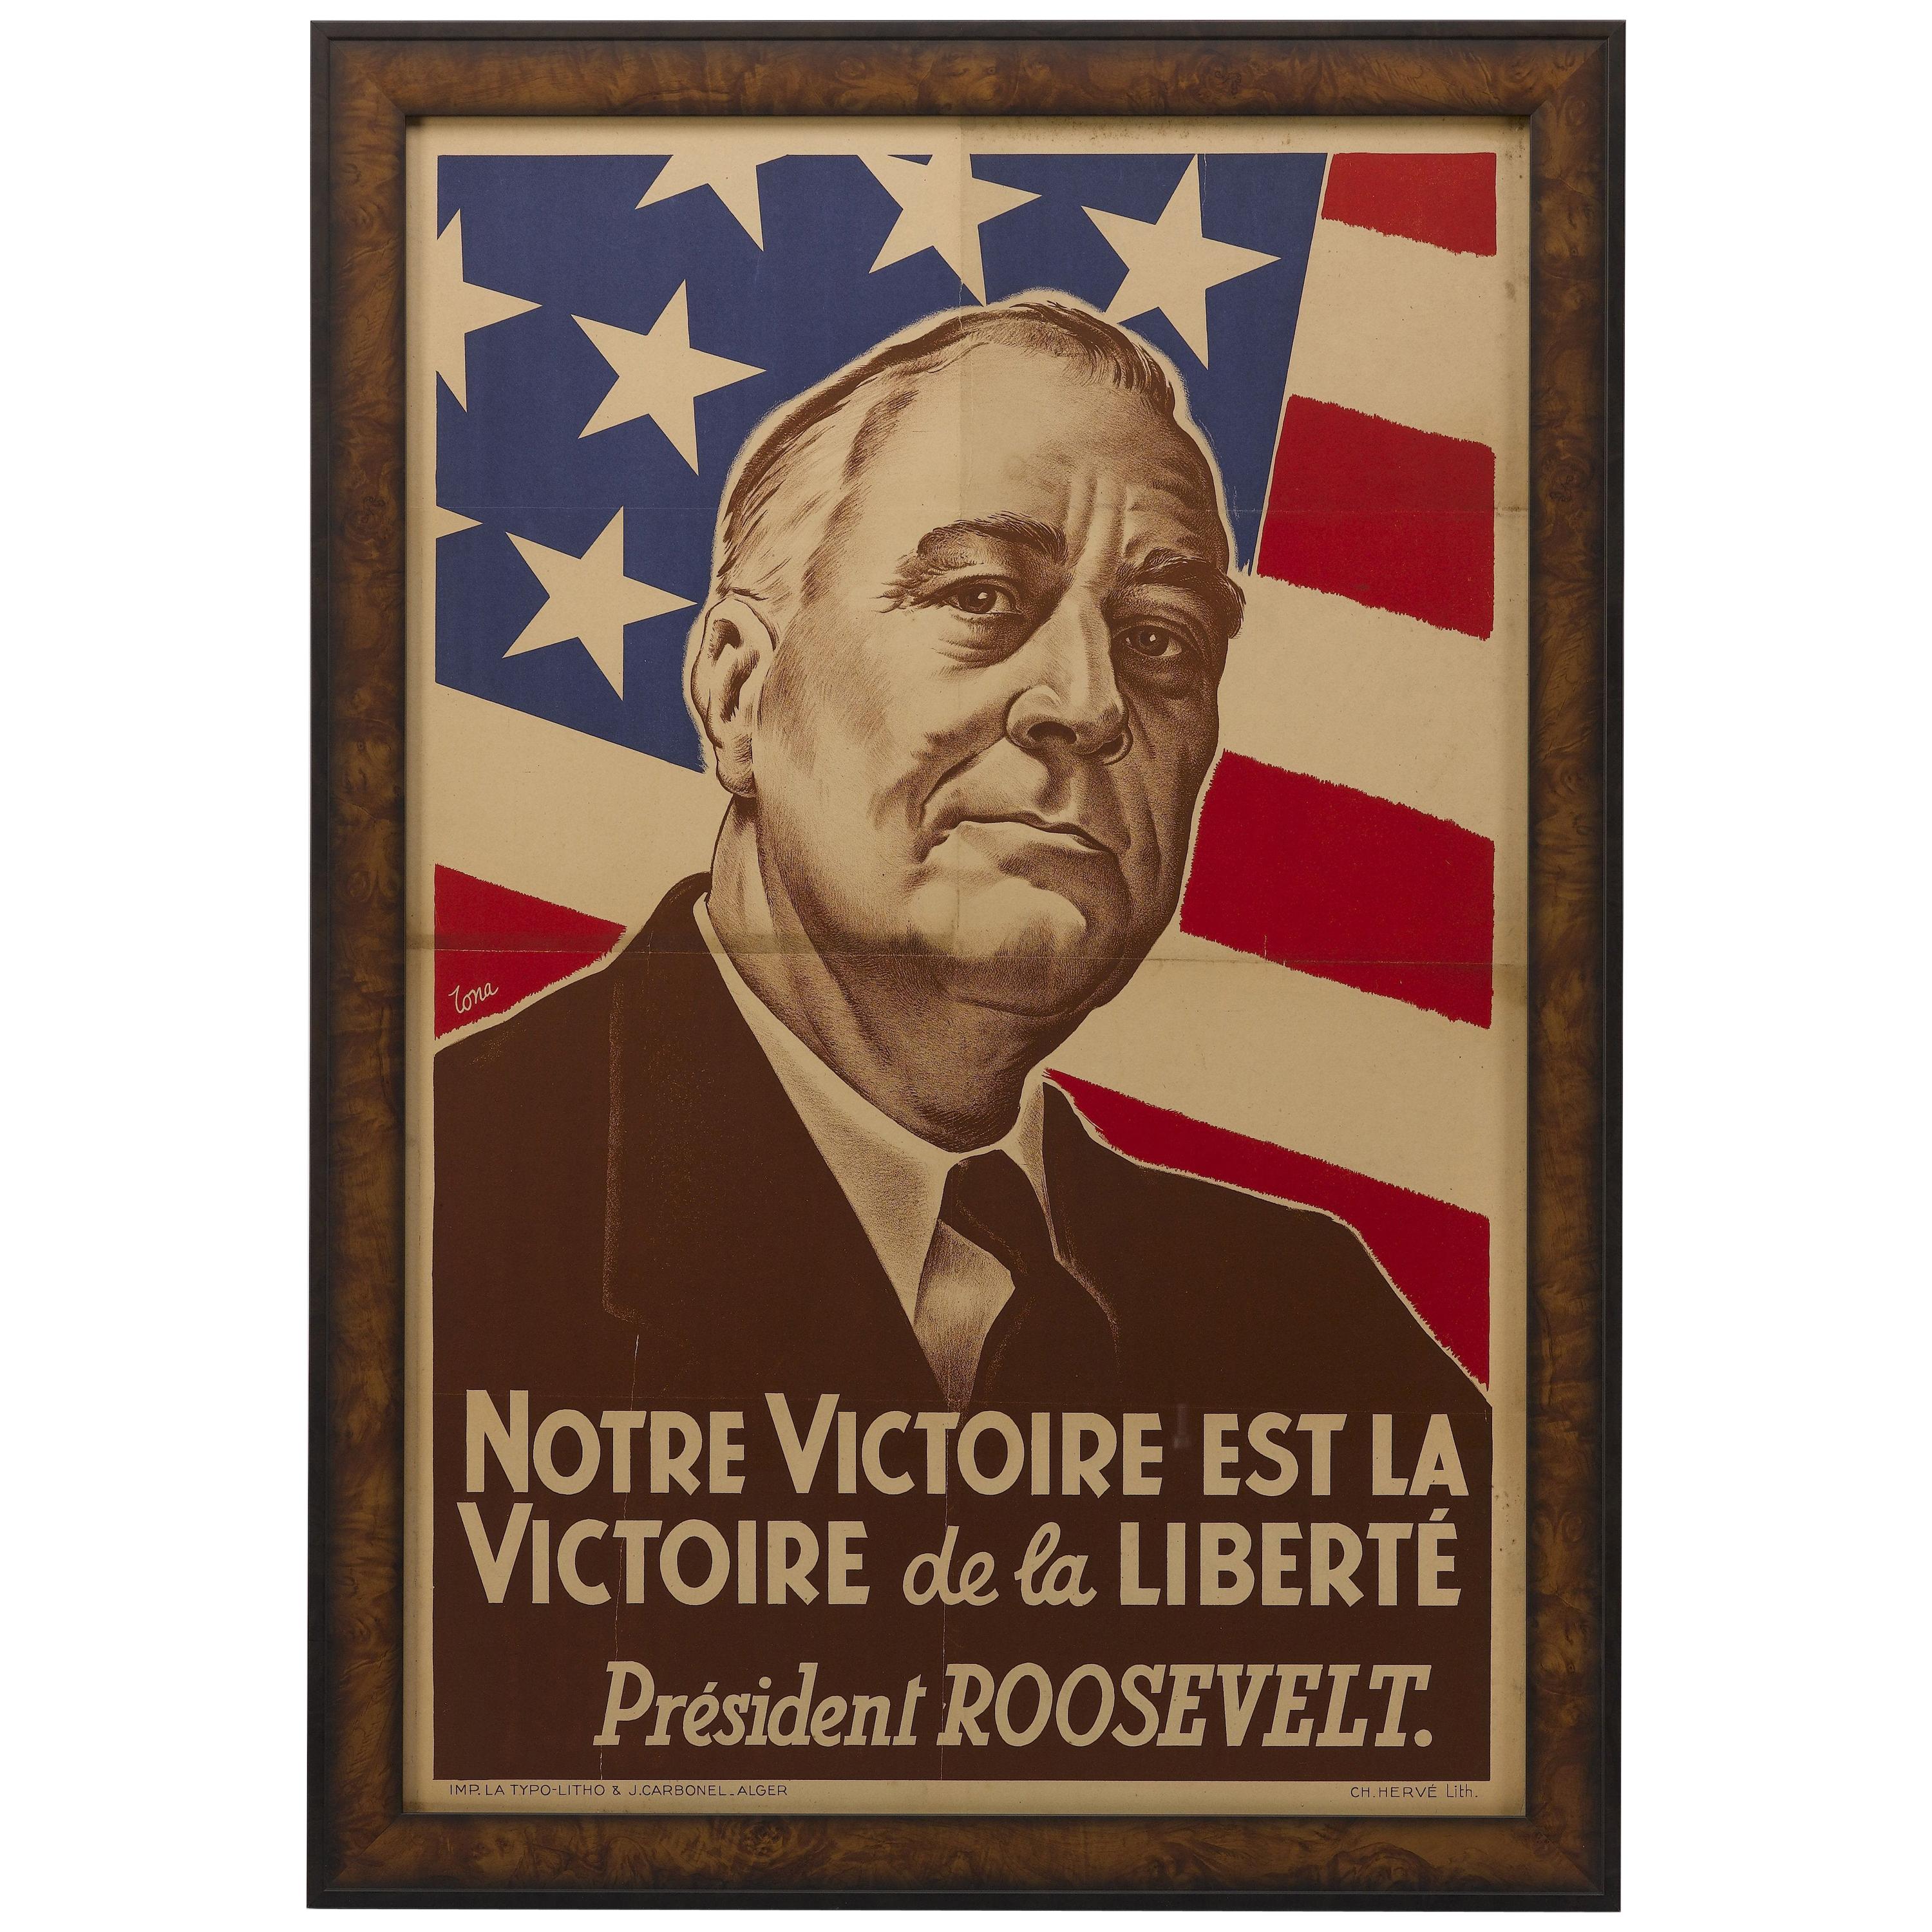 Vintage French WWII Poster with President Roosevelt, circa 1942